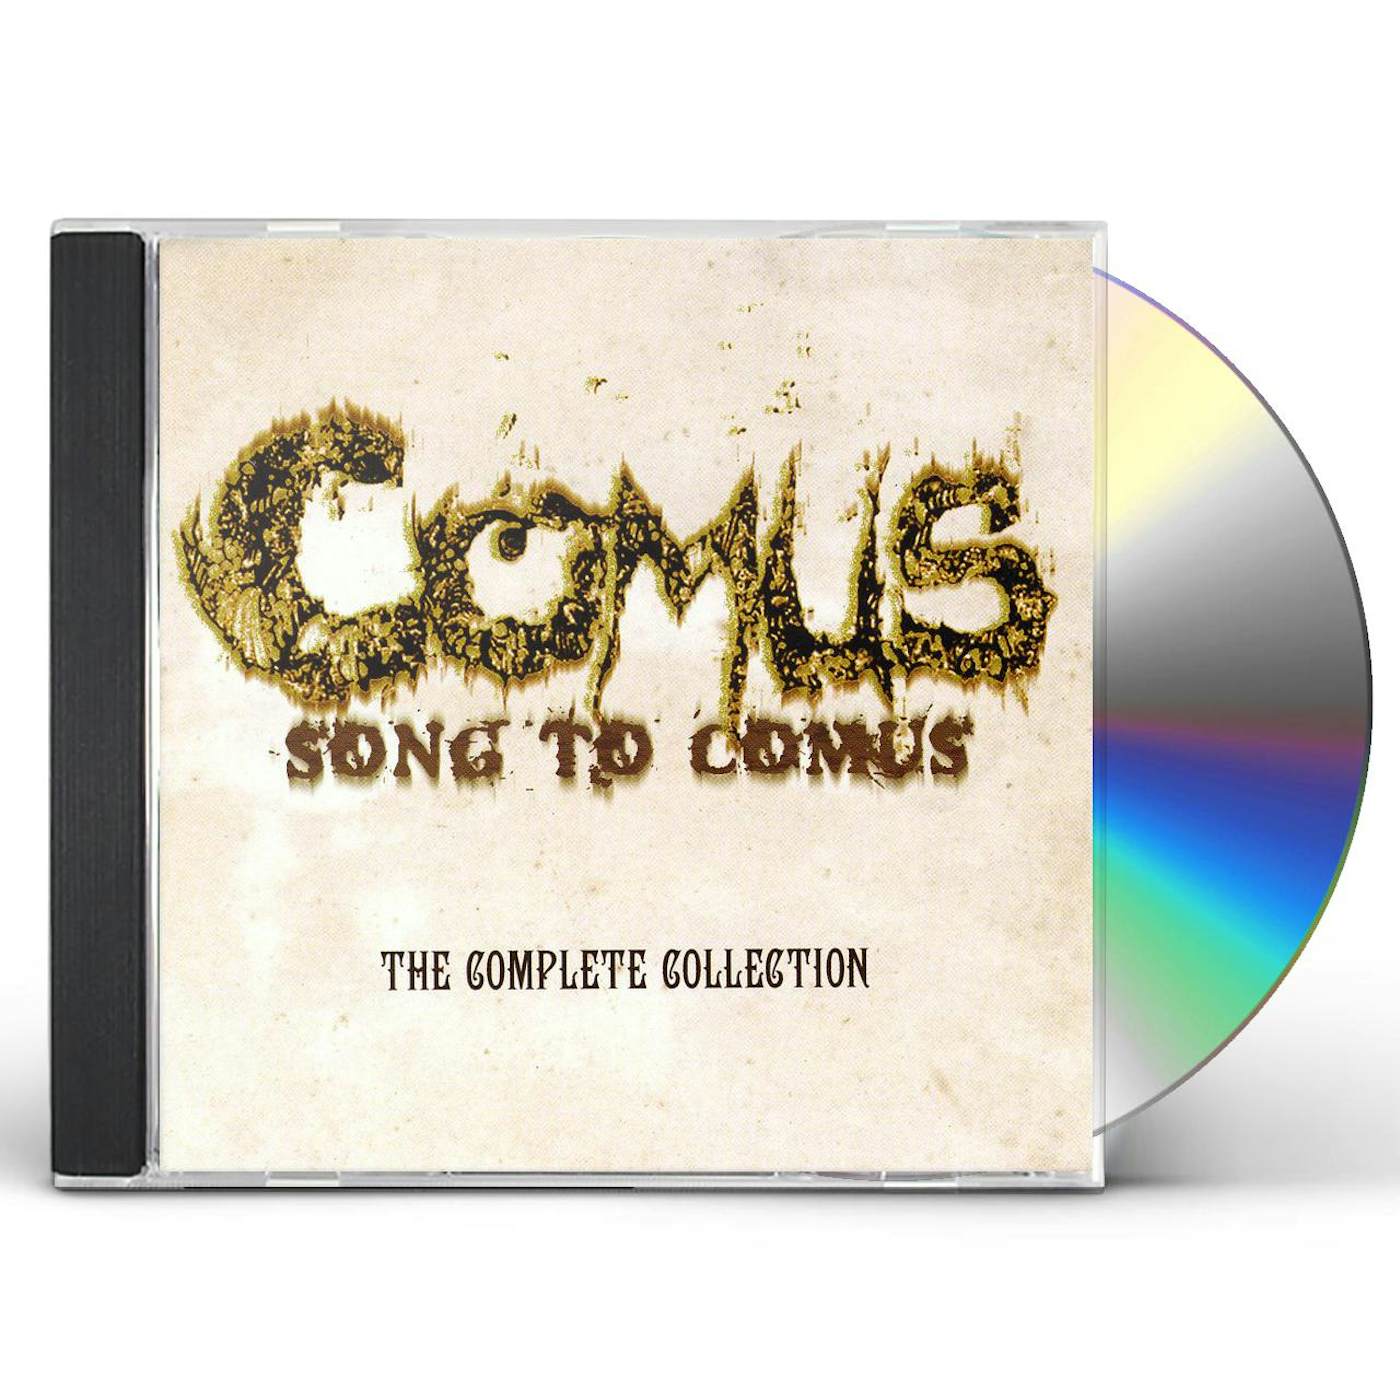 SONG TO COMUS: THE COMPLETE COLLECTION CD